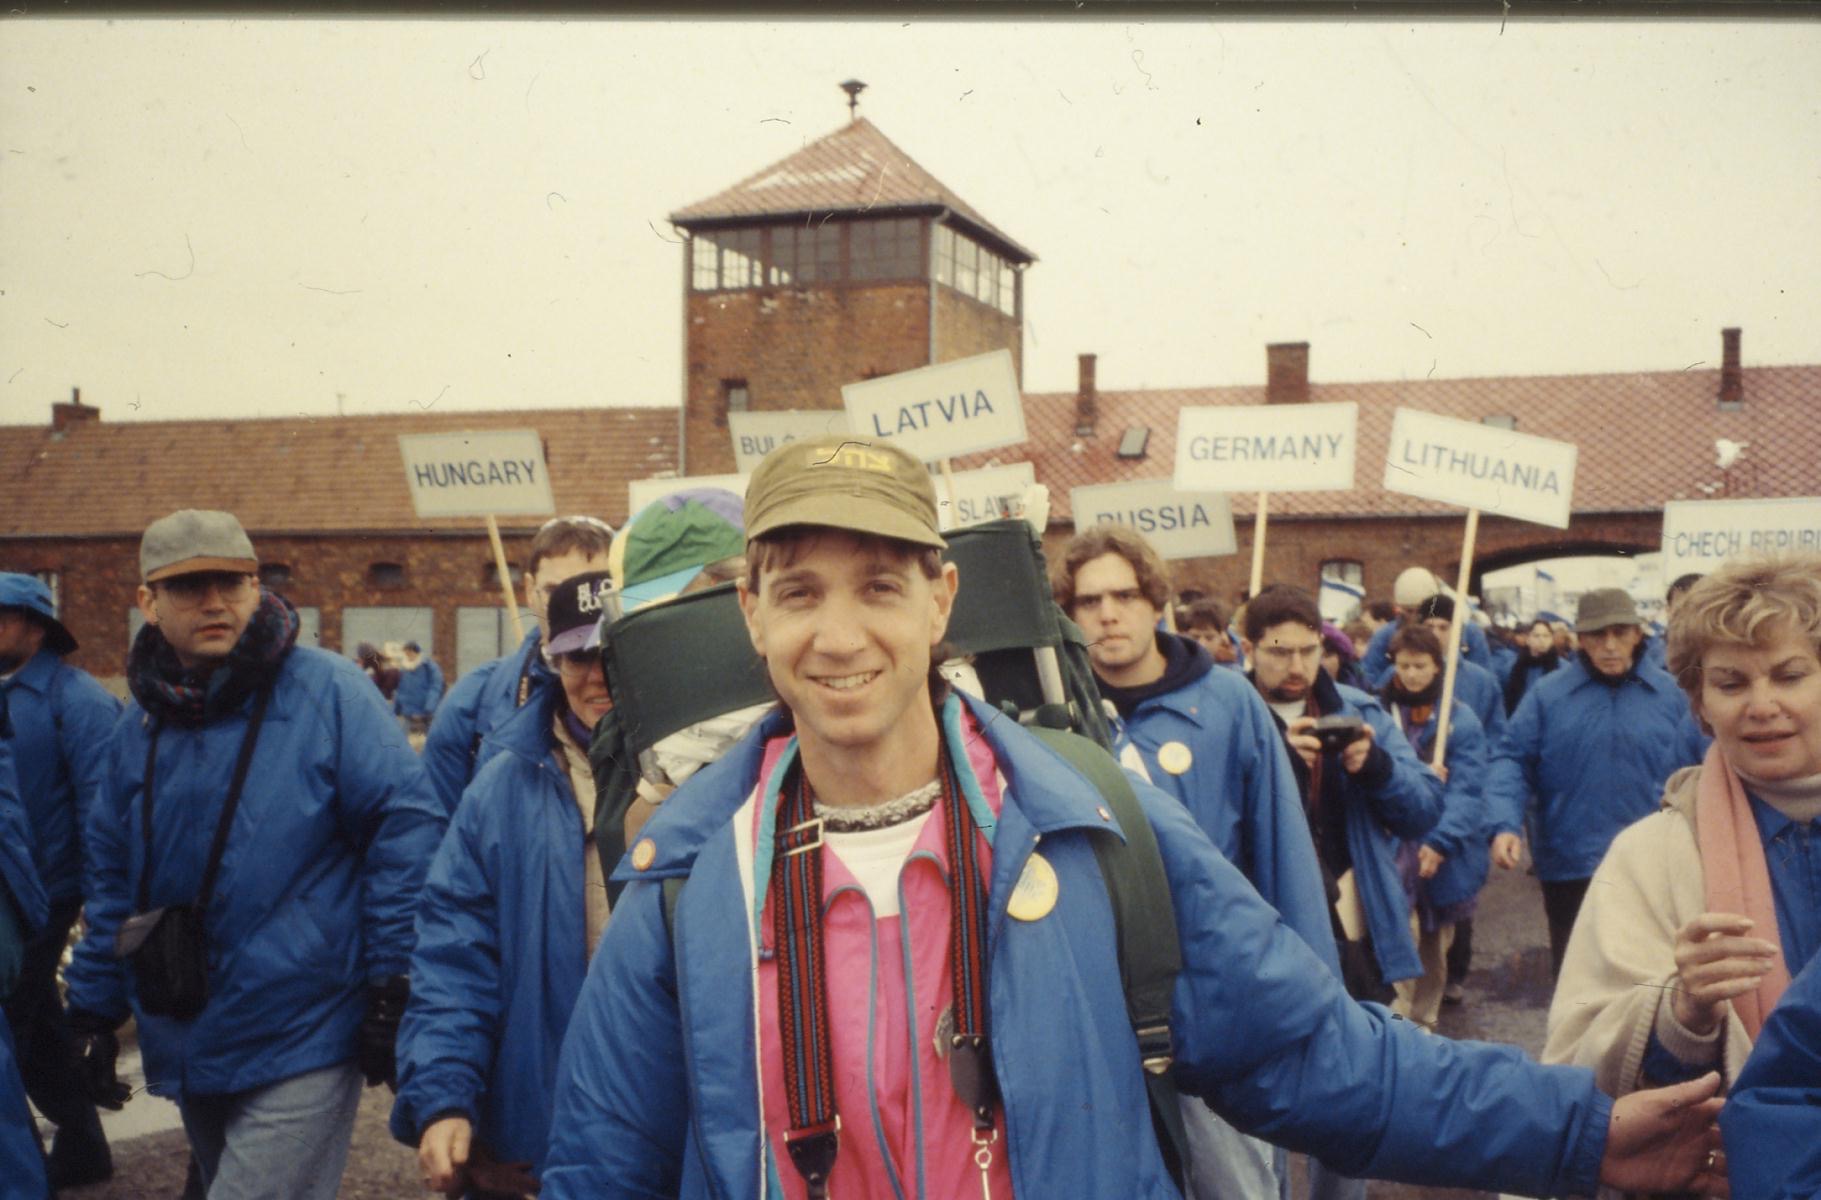 Dr. Mark Friedlander during the 1994 March of the Living program where he volunteered as a chaperone and physician. OJA, accession #2016-2/2.